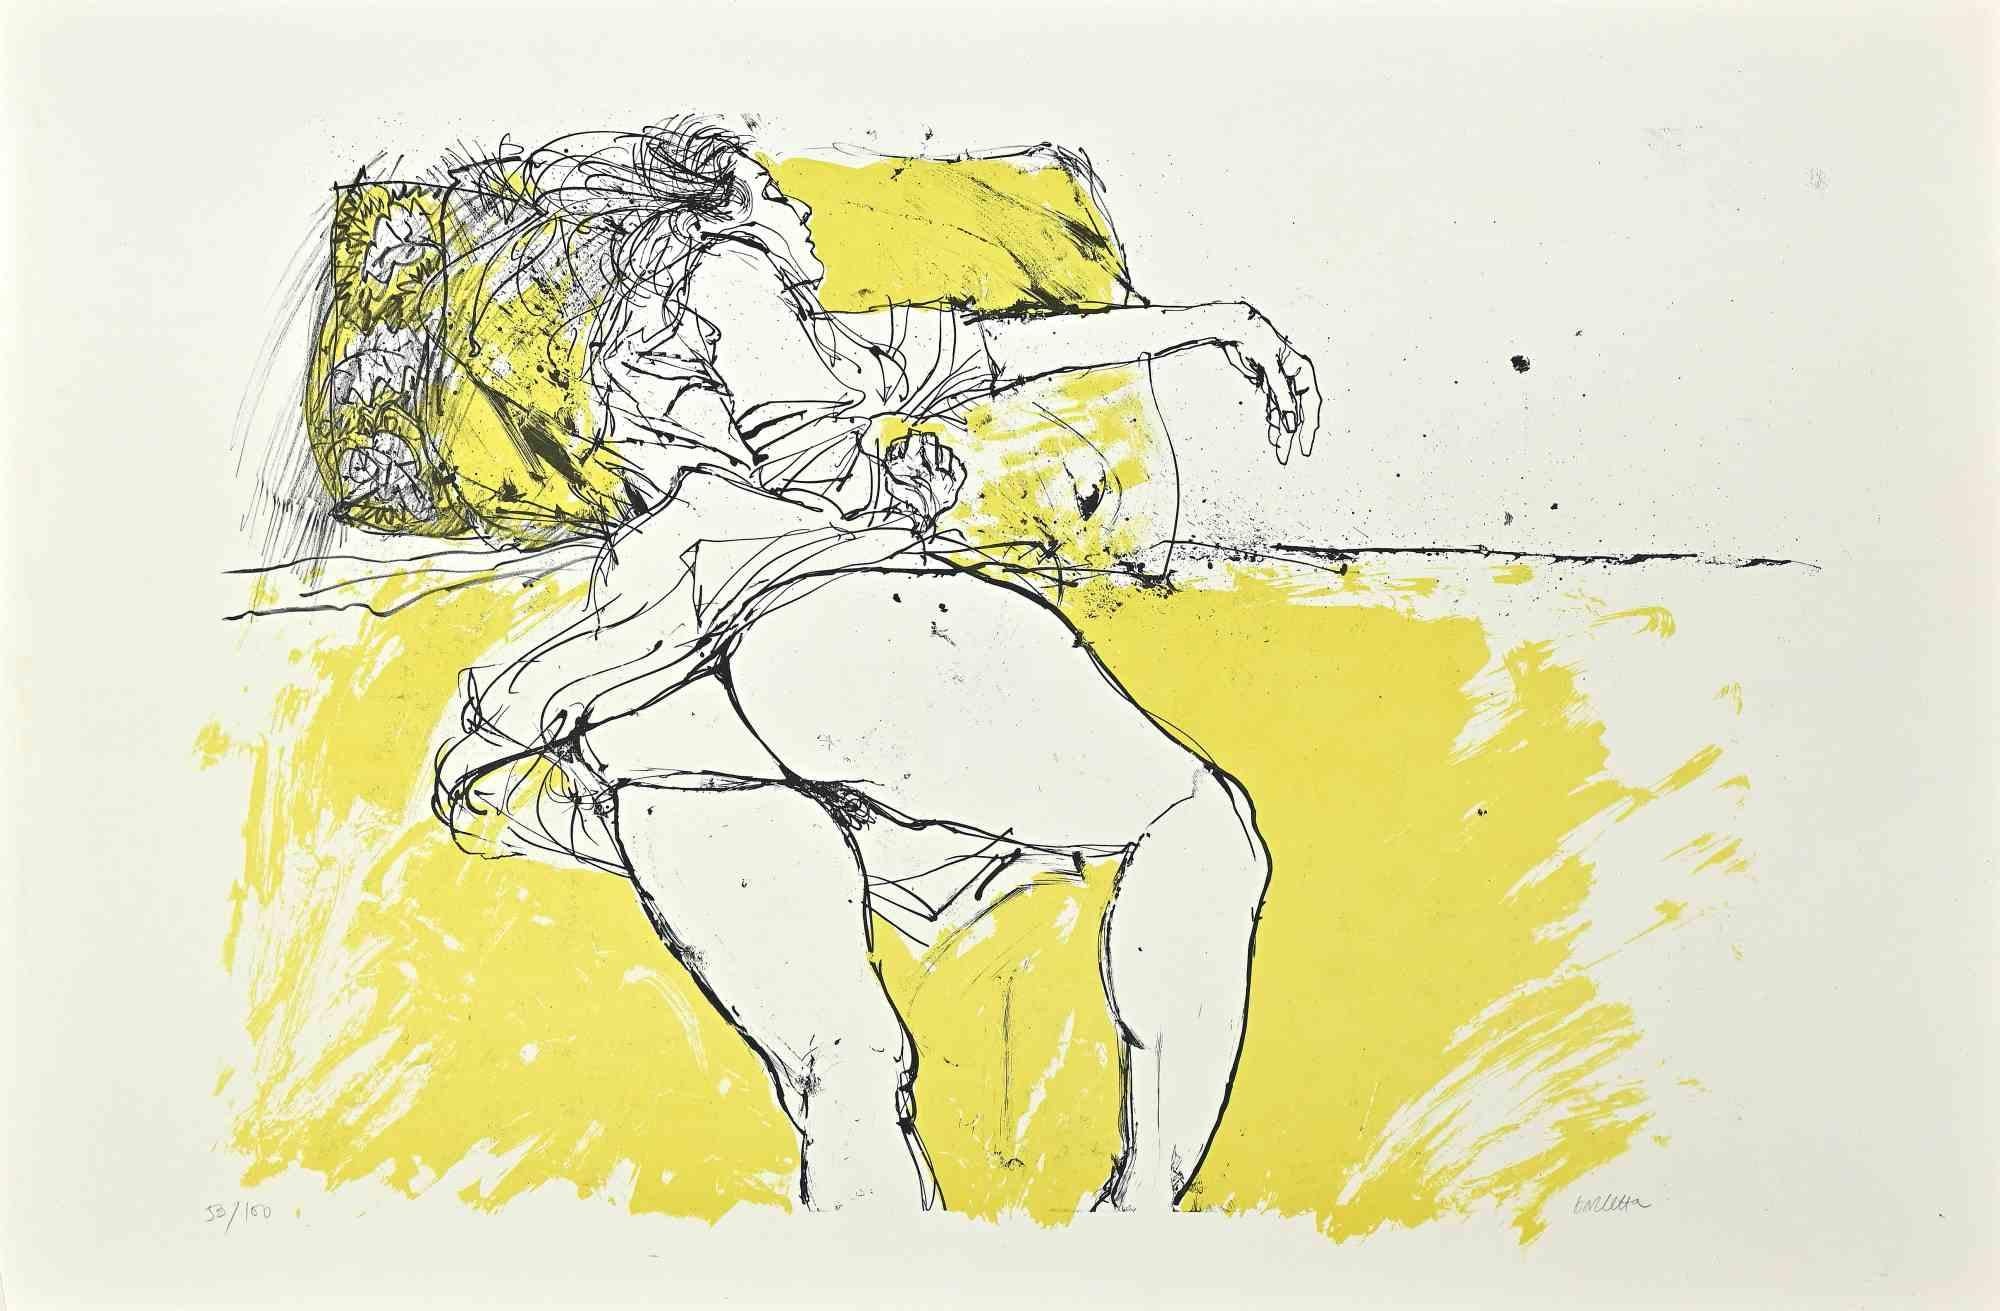 Nude is a lithograph a on paper realized in 1980 by  Sergio Barletta.

Hand-signed  on the lower right in pencil. from the edition of 100 prints. Numbered in pencil on the lower left.

In good condition except for a small cut on the lower